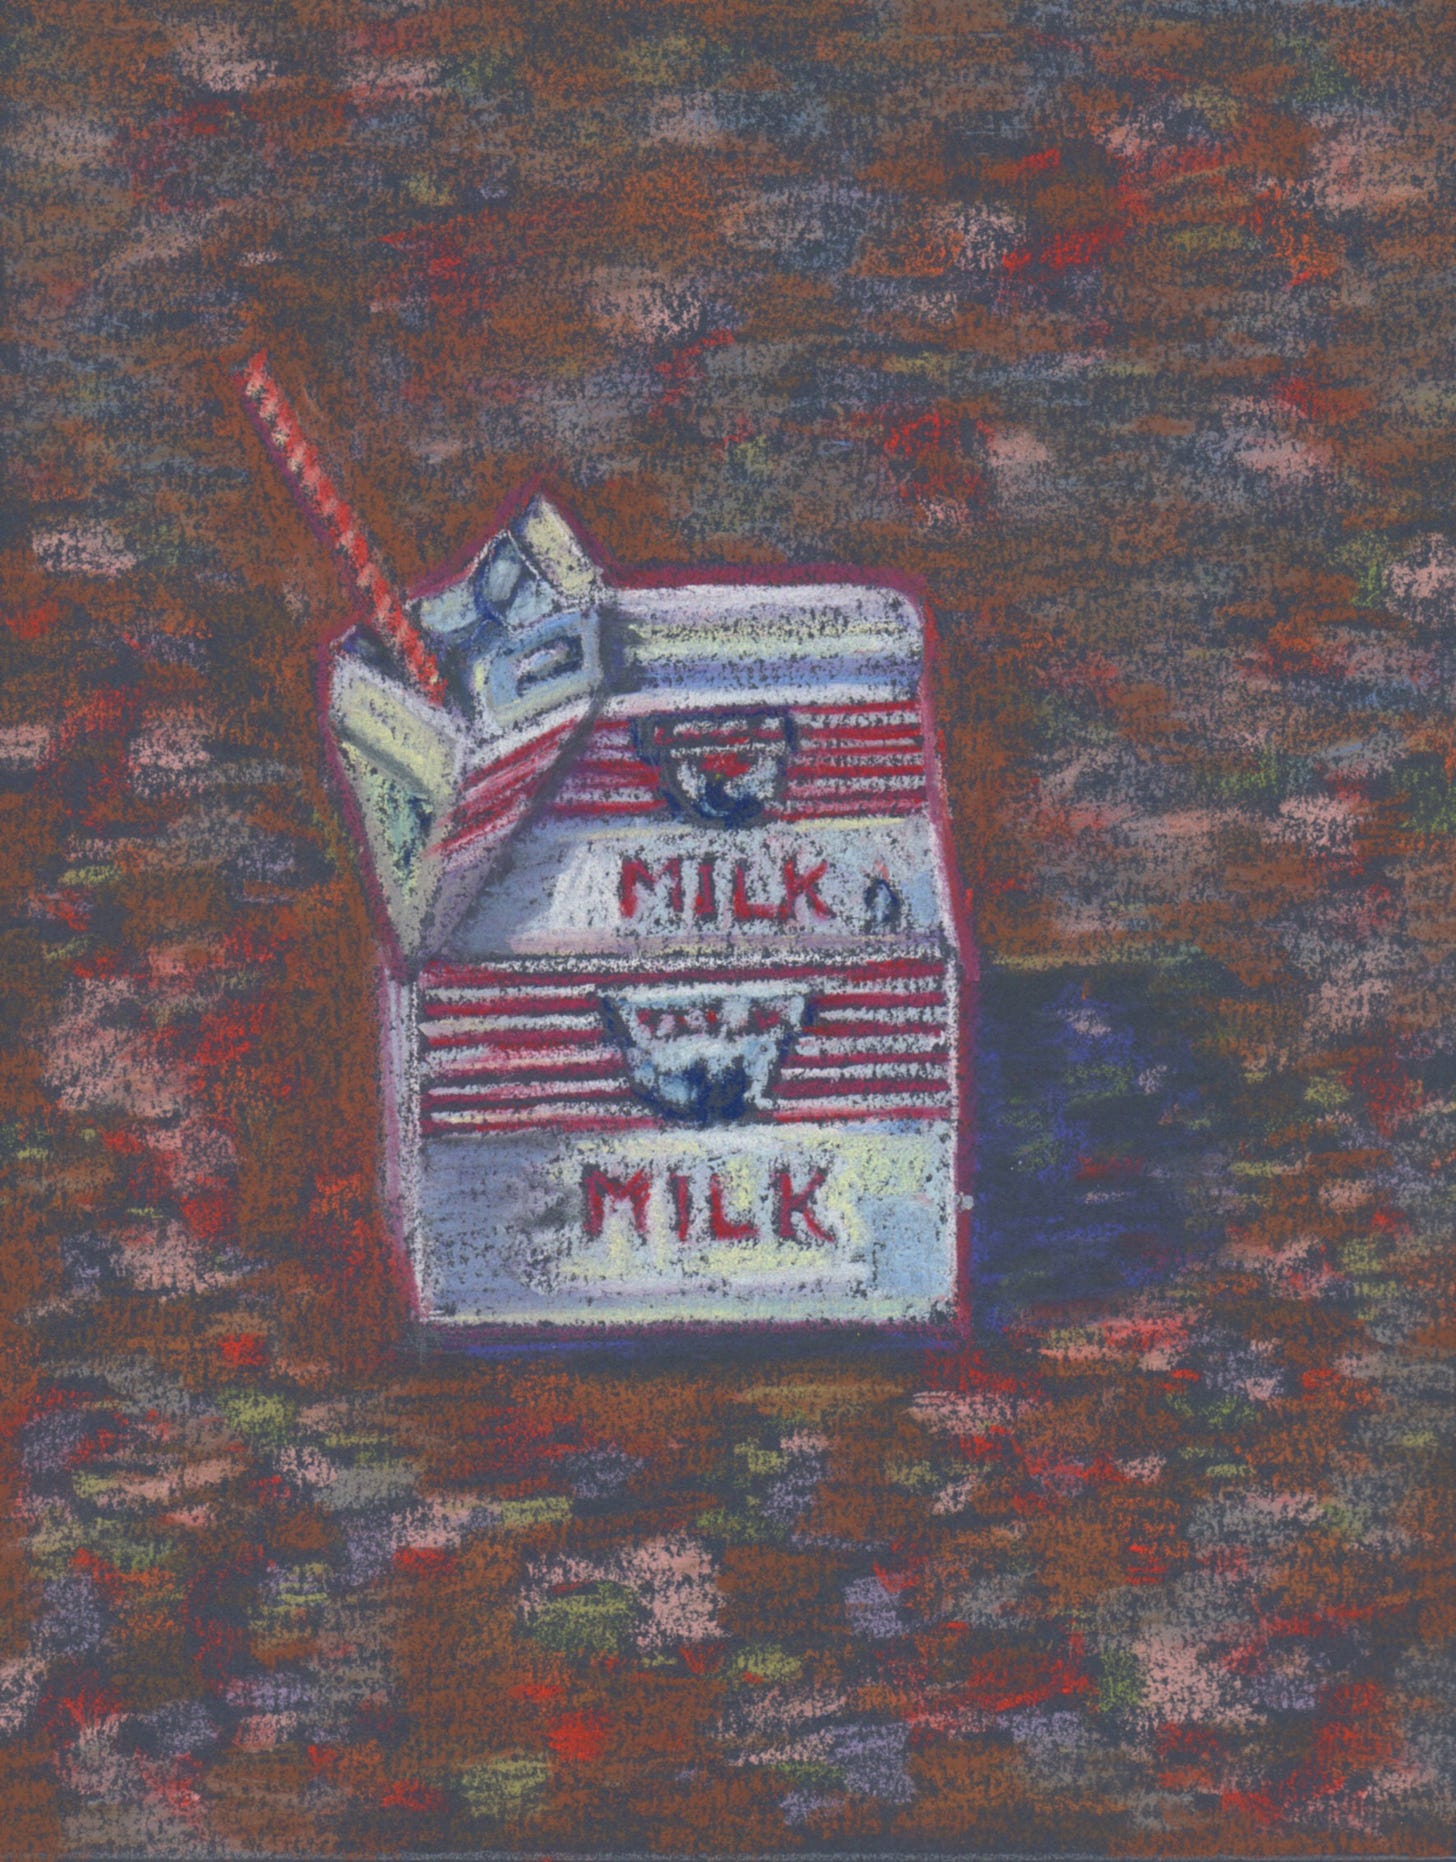 illustration of cafeteria size milk carton and straw